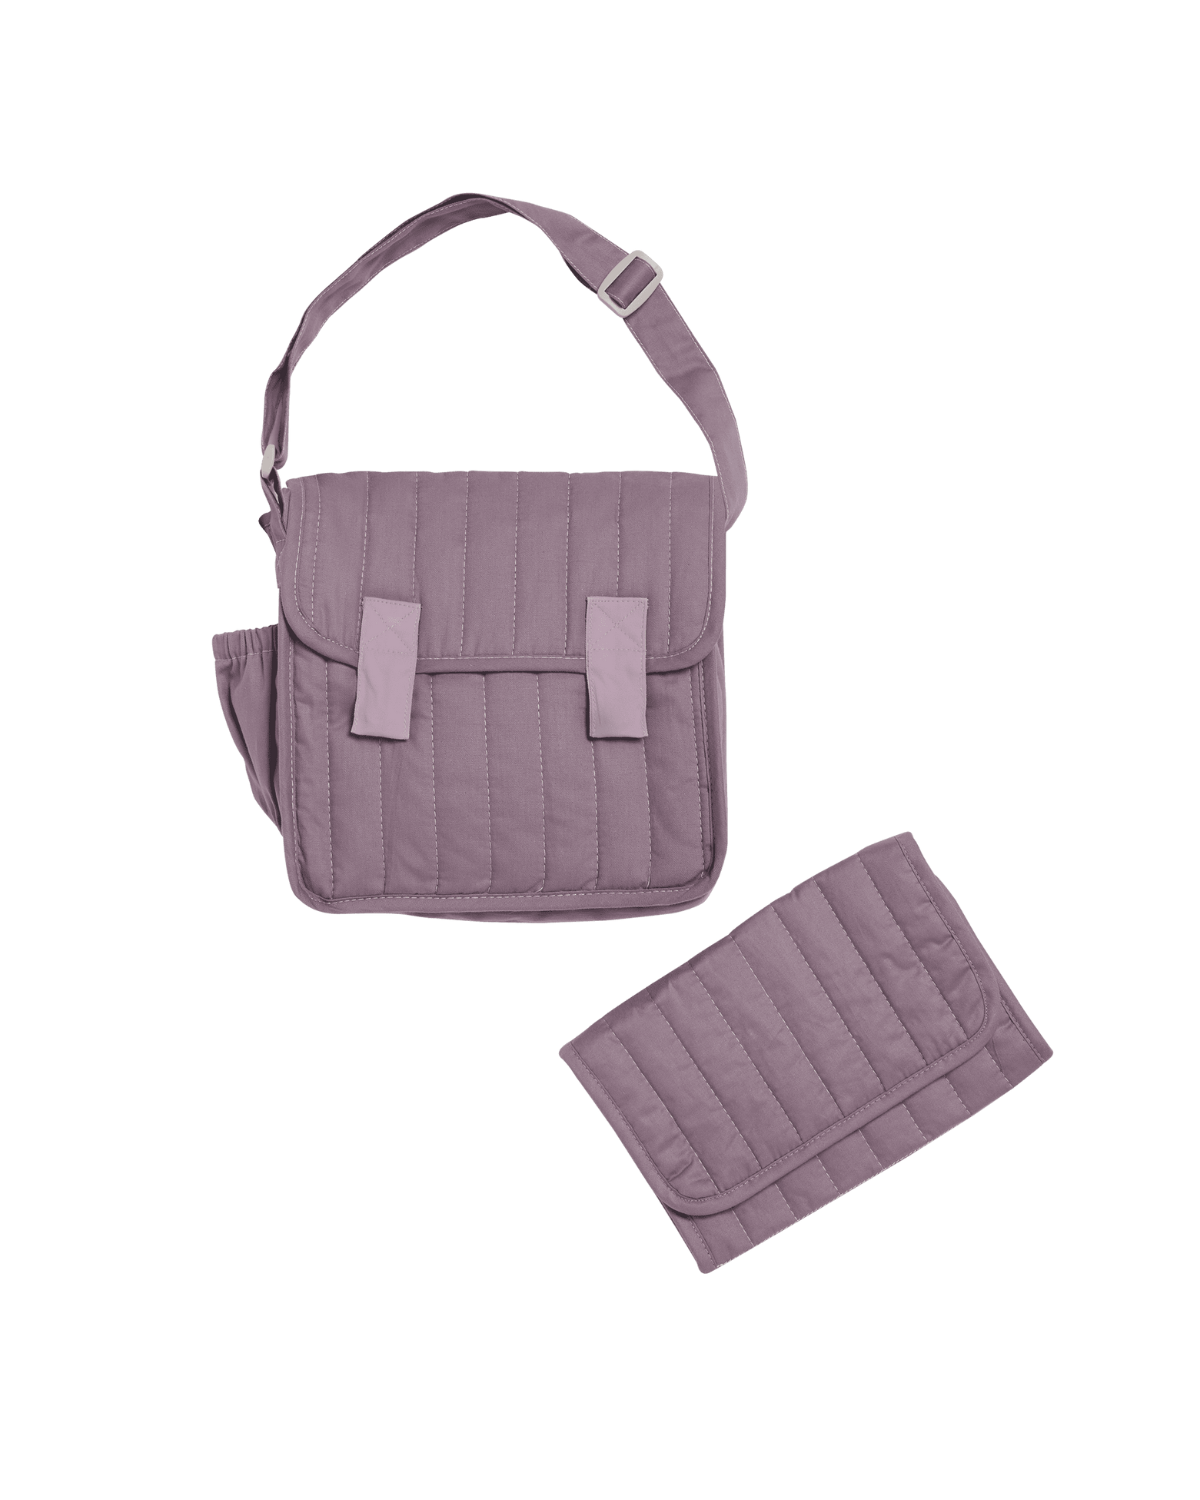 Convertible Changing Set for Babies - Carrie Lavender